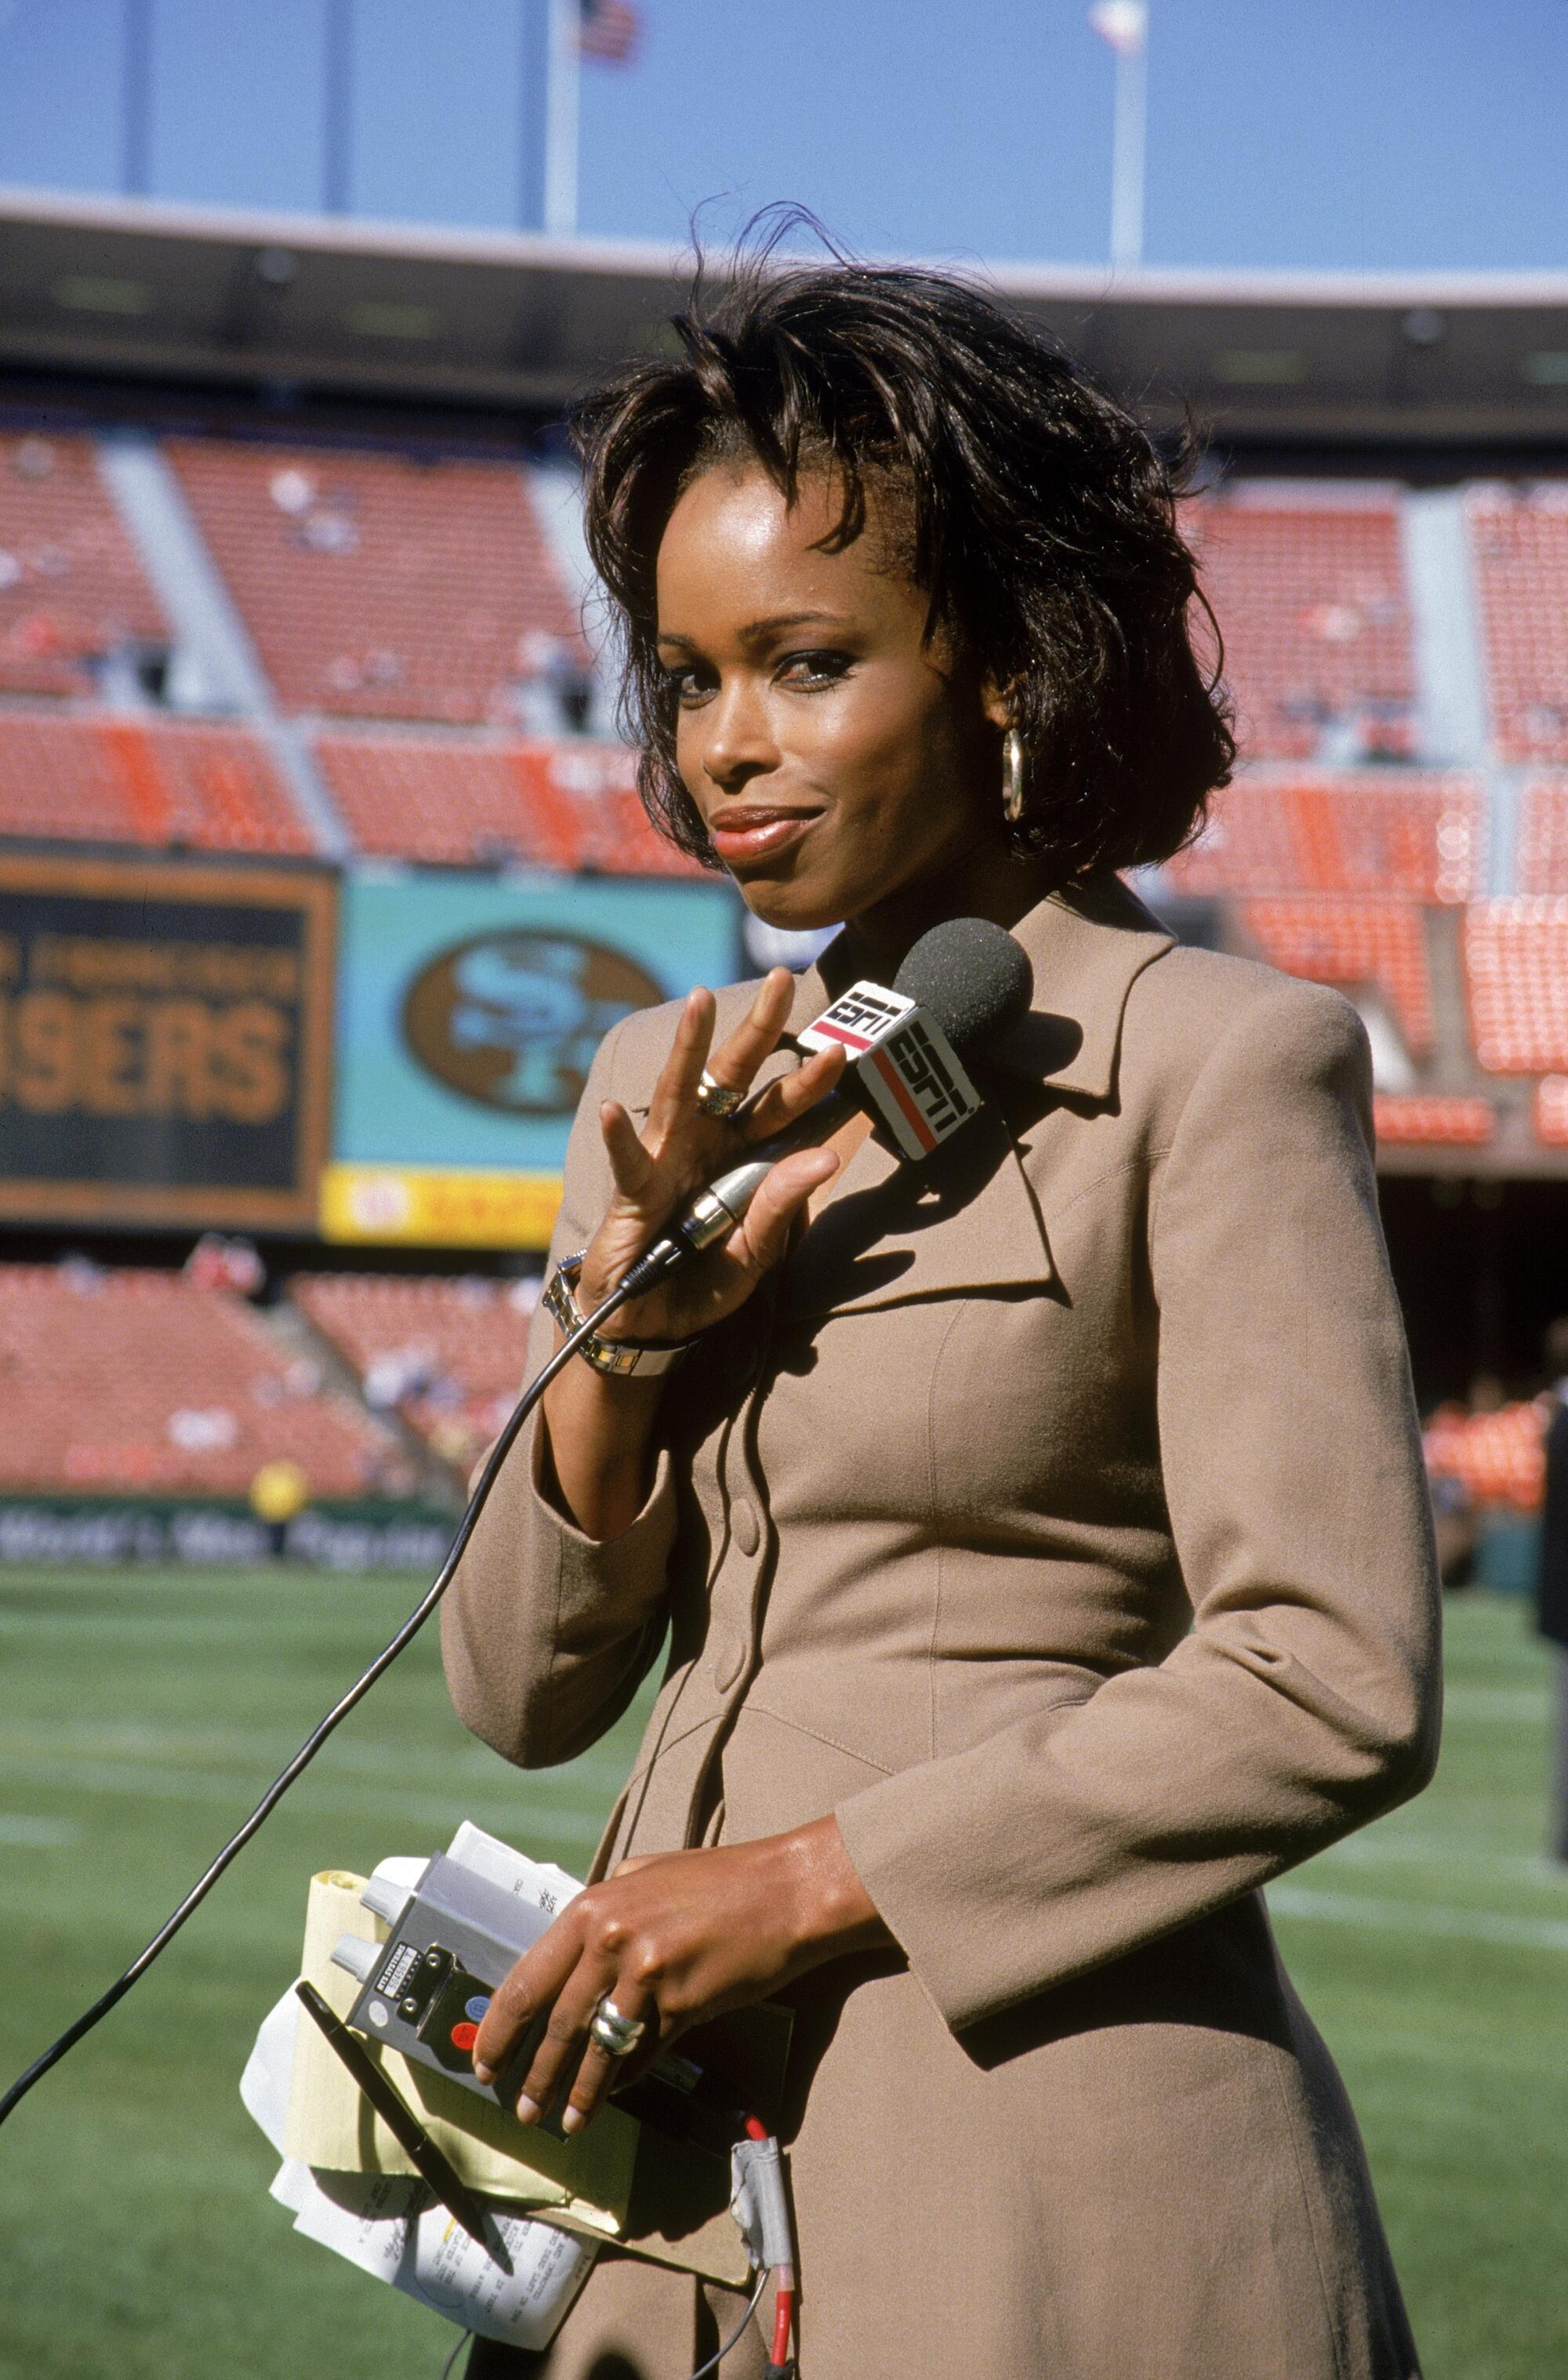 ESPN reporter Pam Oliver waves at the camera before a game between the Los Angeles Raiders and the San Francisco 49ers